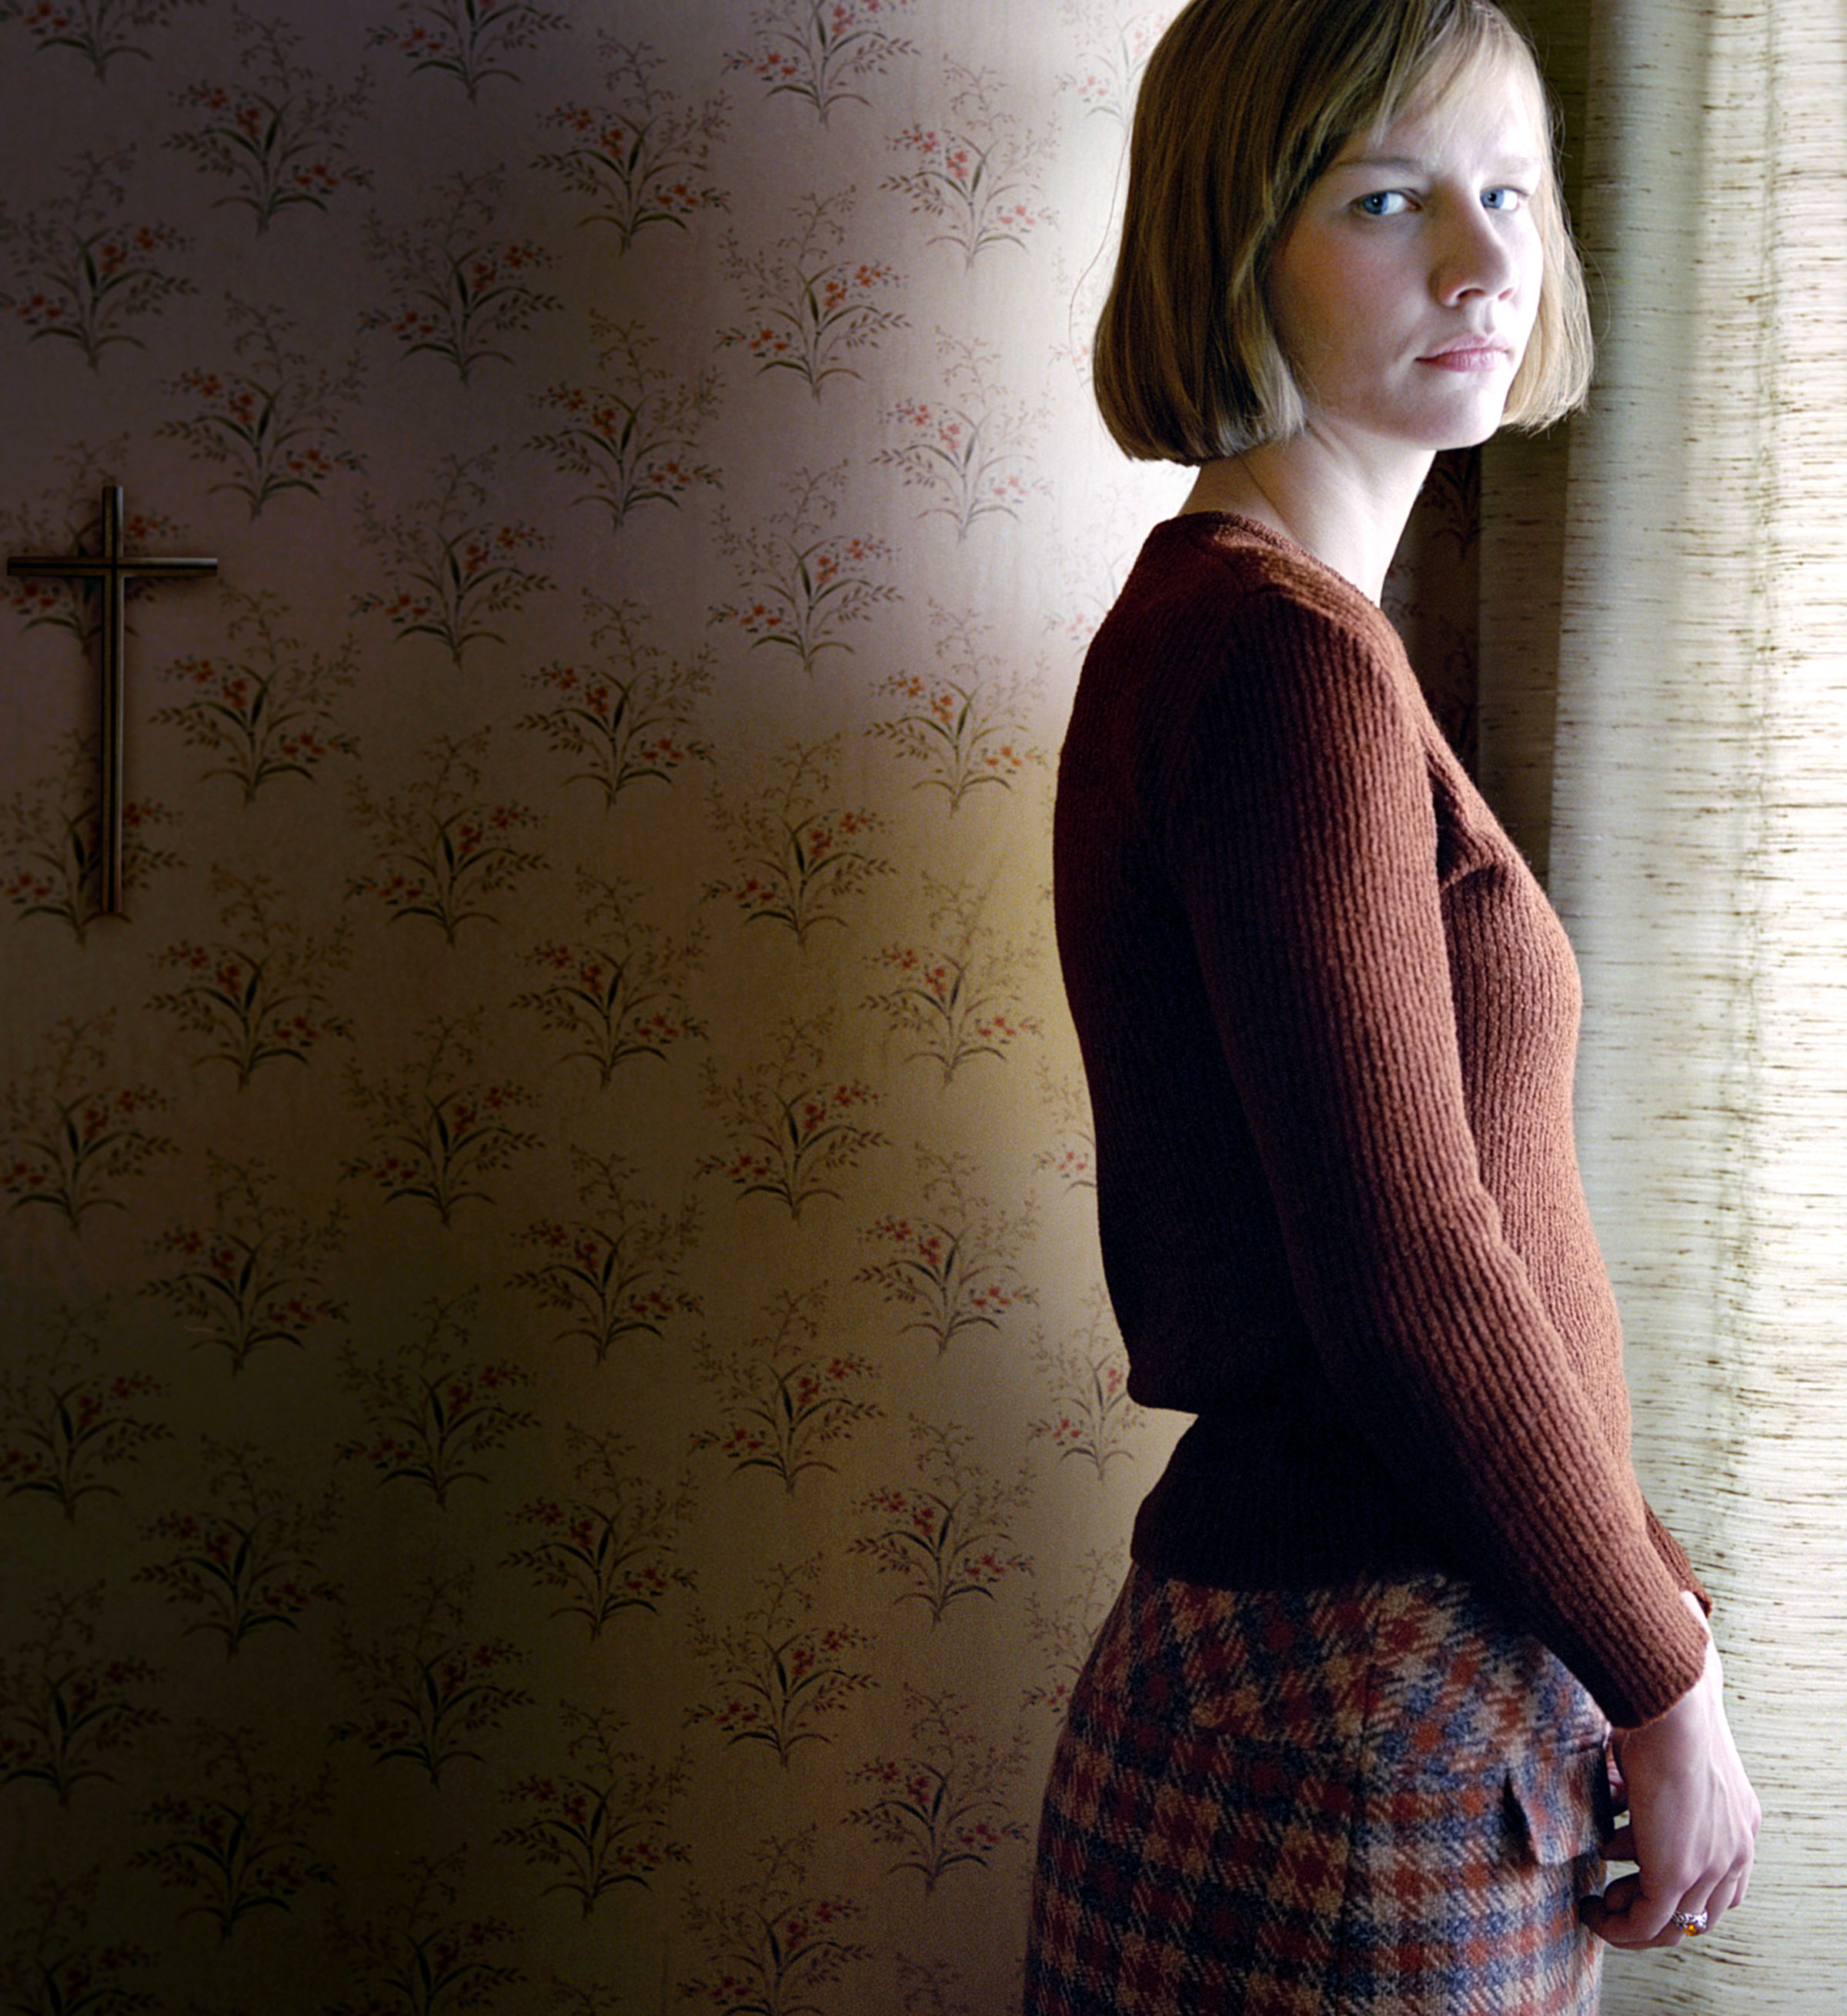 Close-up of Sandra in a sweater standing next to a window